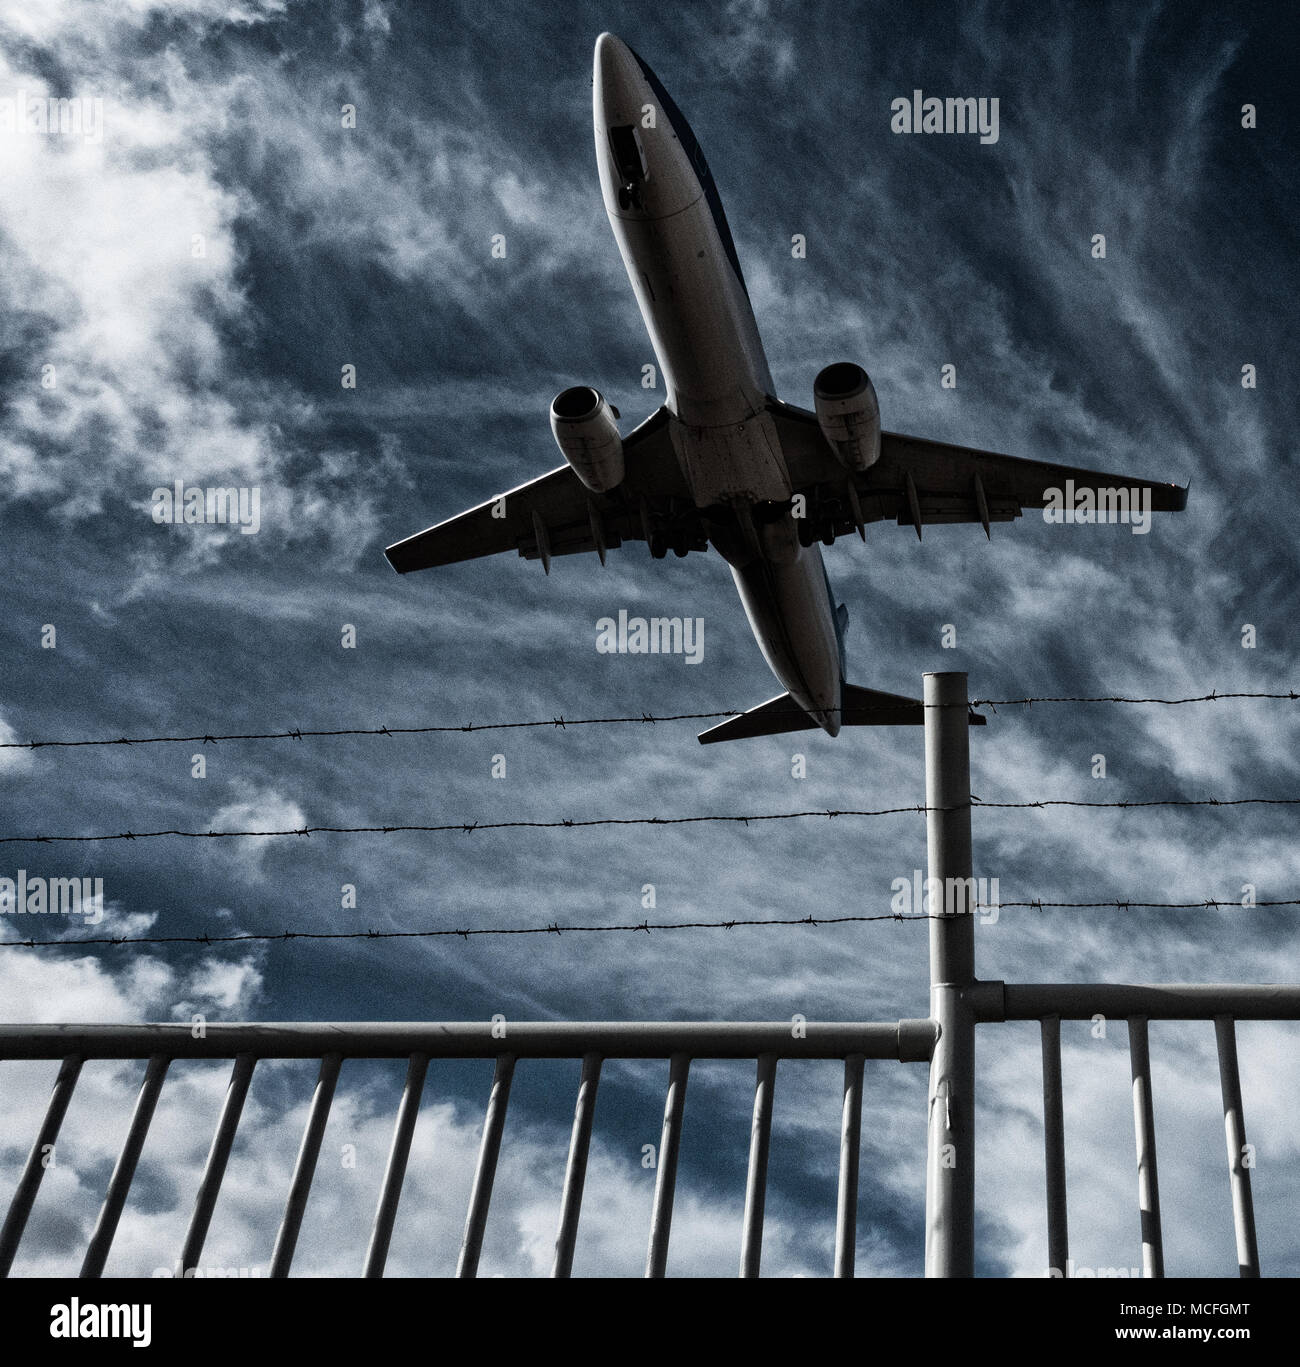 Low flying aircraft/airplane flying over barbed wire fence. Concept image: no fly zone, Ukraine Russia conflict, war Stock Photo